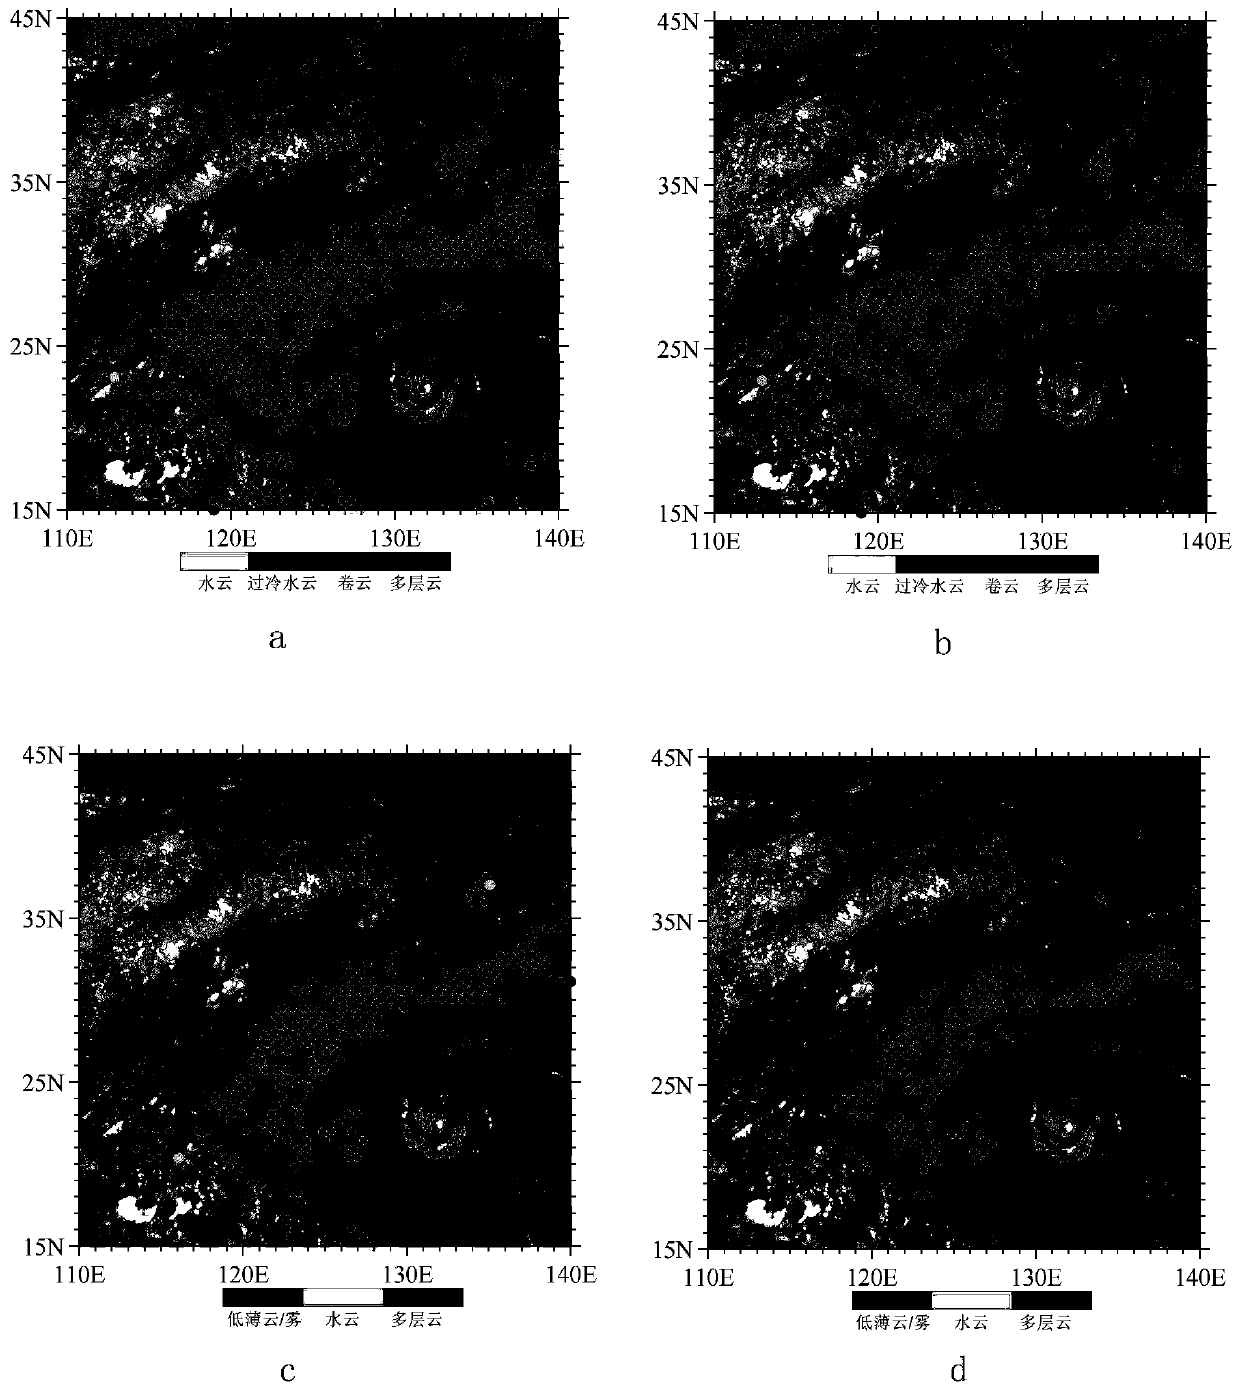 Clear-air channel detection quality control method suitable for assimilation of geostationary satellite data